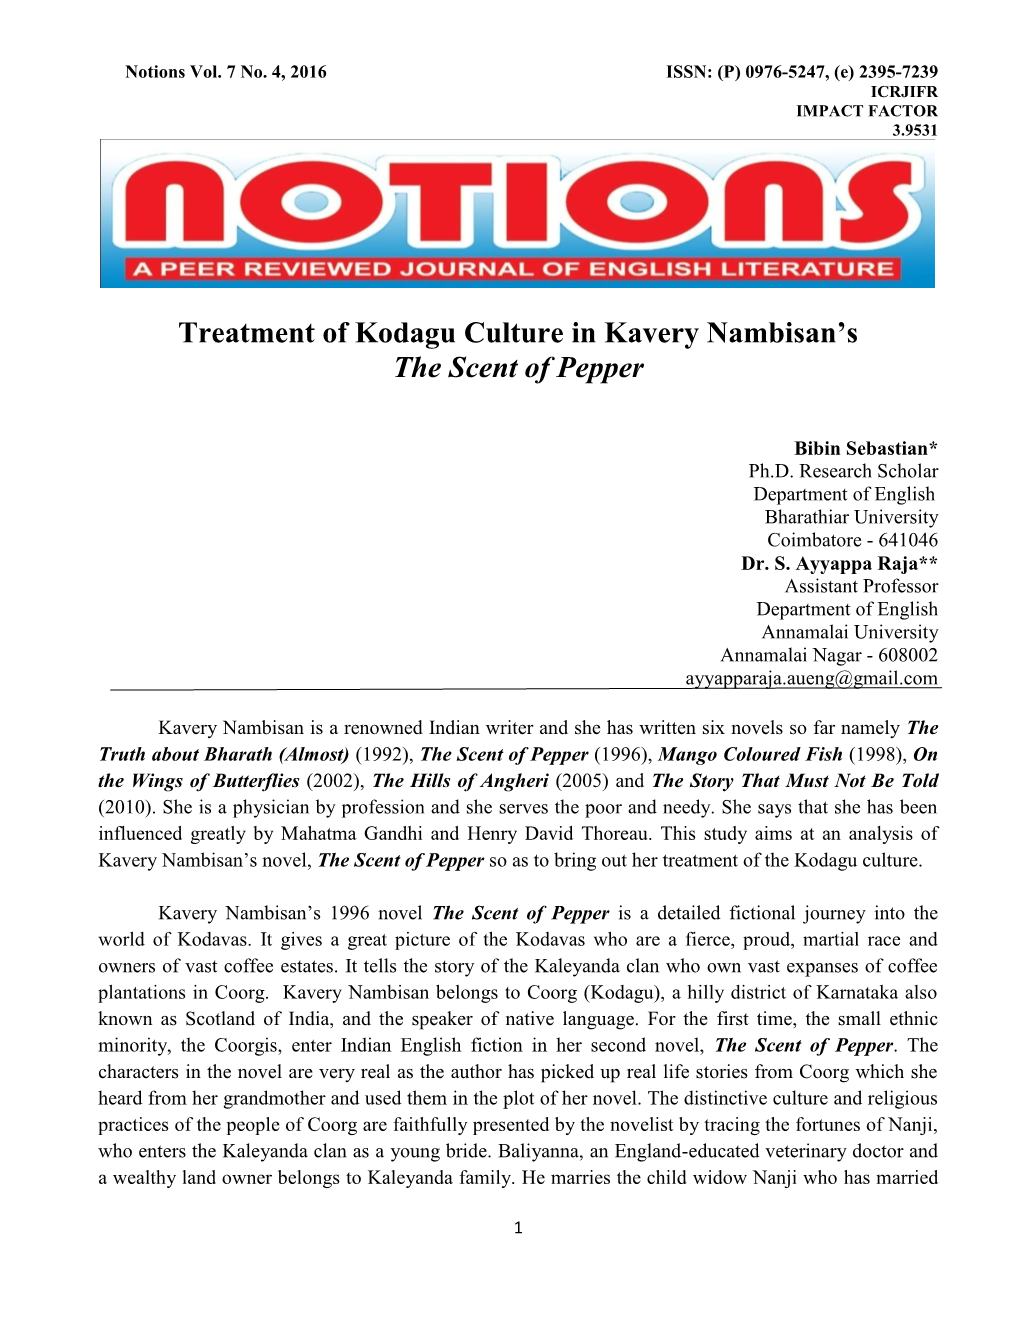 Treatment of Kodagu Culture in Kavery Nambisan's the Scent Of